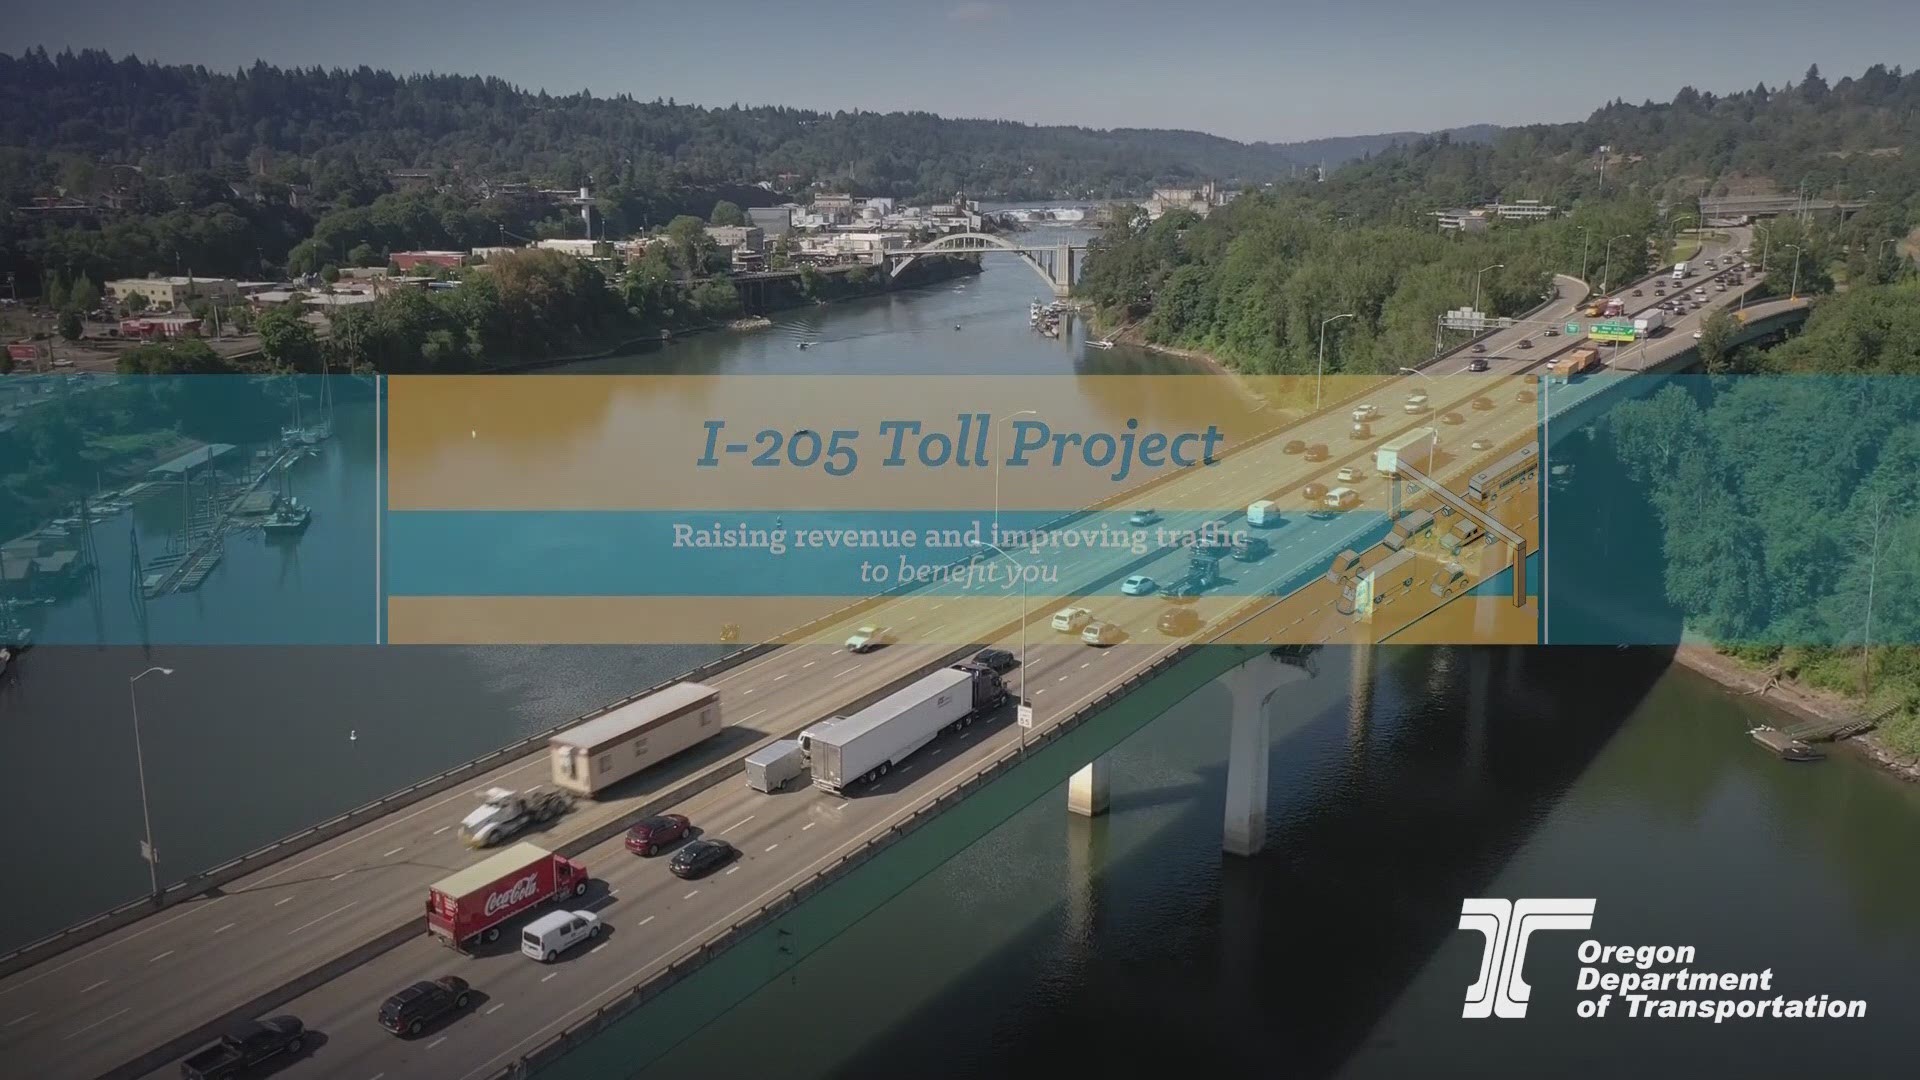 Tolling is coming to the Portland metro area. Here's when you can expect it on I-205.